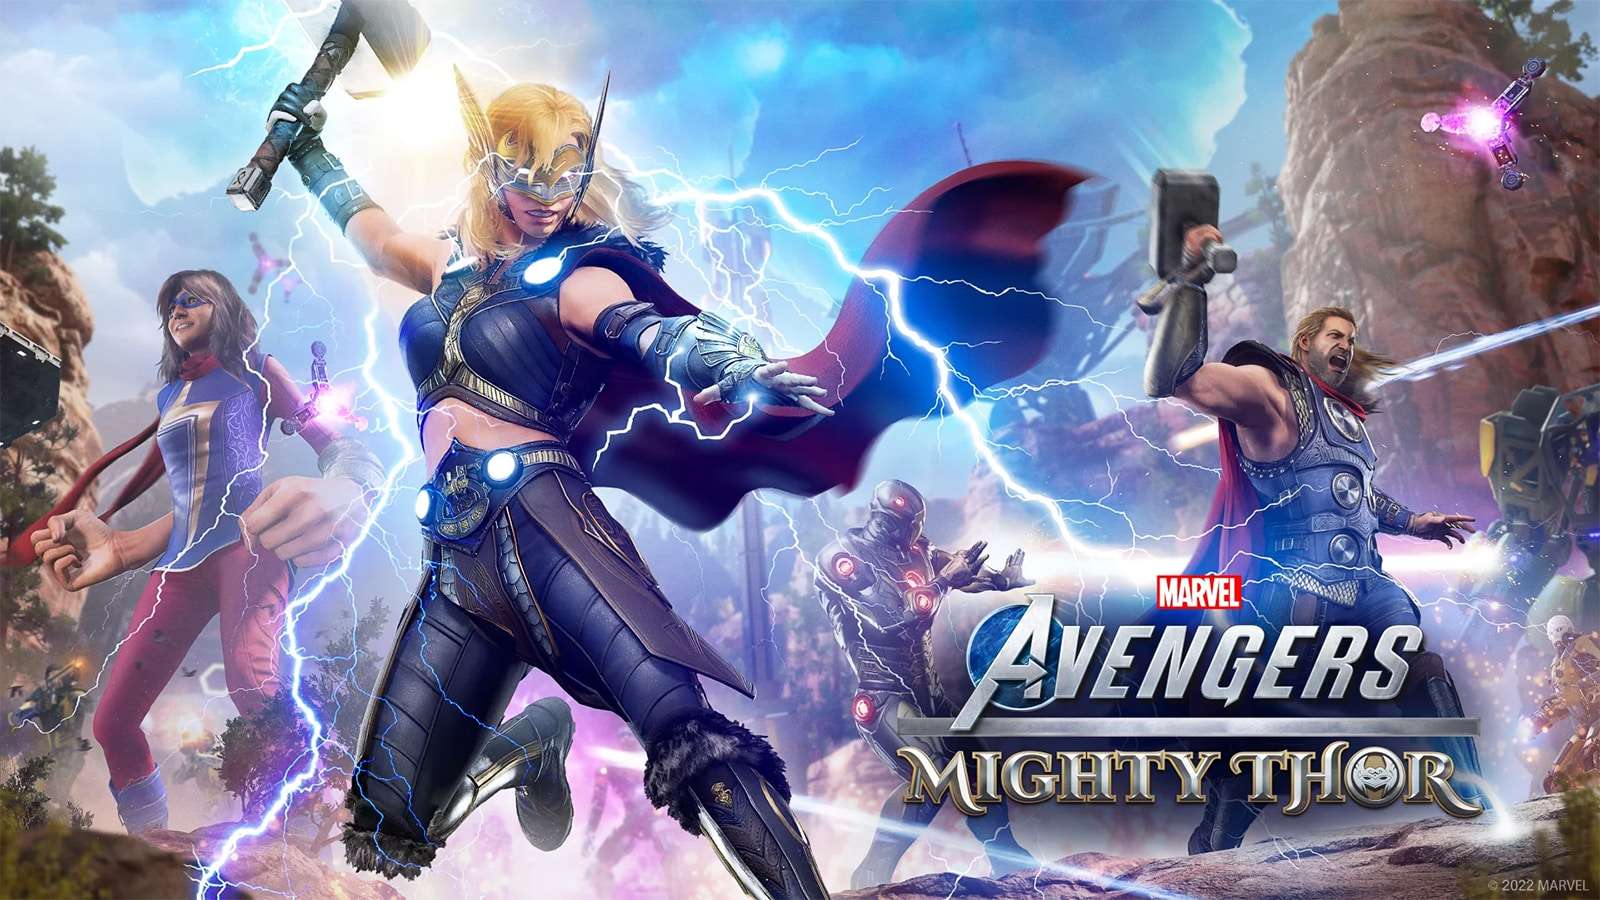 Mighty Thor in Marvel's Avengers